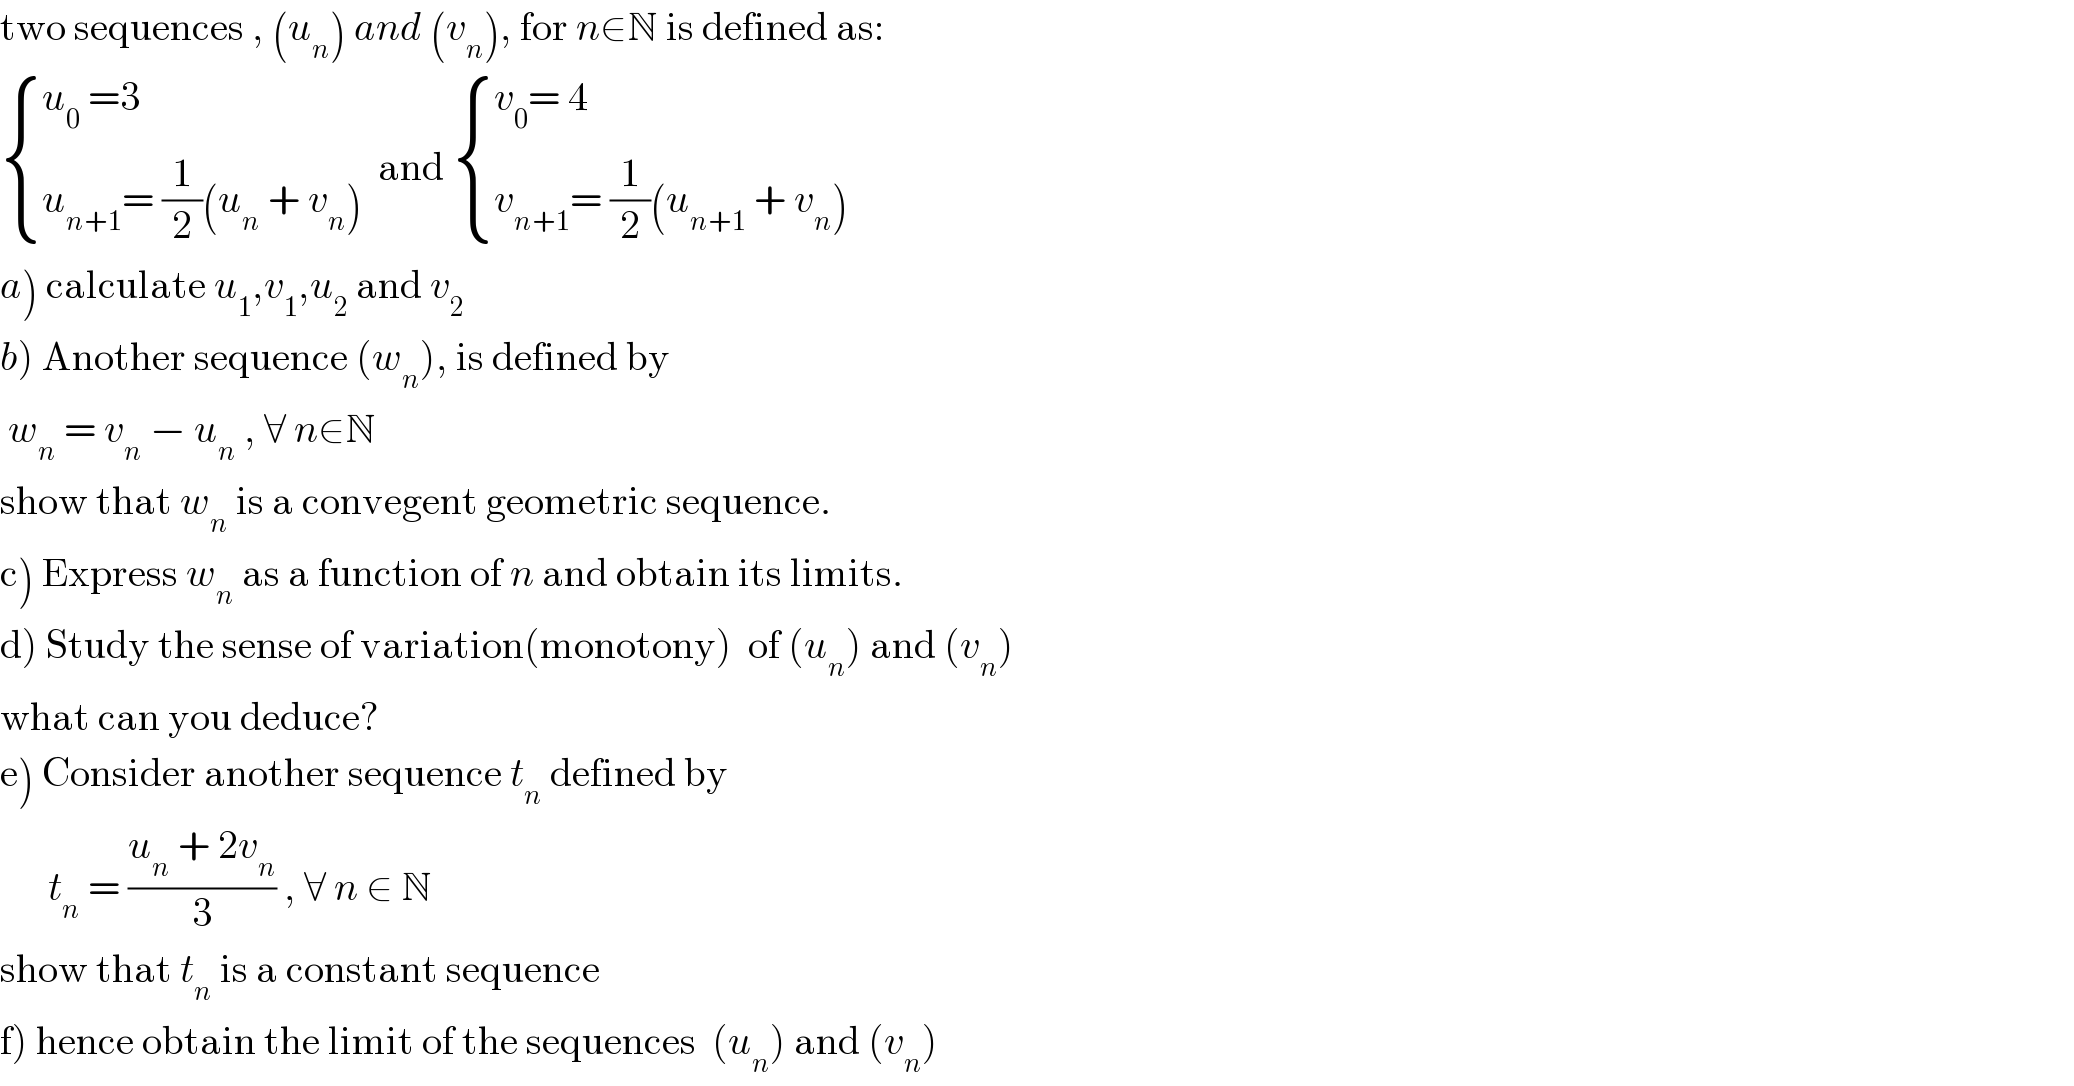 two sequences , (u_n ) and (v_n ), for n∈N is defined as:   { ((u_0  =3)),((u_(n+1) = (1/2)(u_n  + v_n )  )) :}and  { ((v_0 = 4)),((v_(n+1) = (1/2)(u_(n+1)  + v_n ))) :}  a) calculate u_1 ,v_1 ,u_2  and v_2   b) Another sequence (w_n ), is defined by    w_n  = v_n  − u_n  , ∀ n∈N  show that w_n  is a convegent geometric sequence.  c) Express w_n  as a function of n and obtain its limits.  d) Study the sense of variation(monotony)  of (u_n ) and (v_n )  what can you deduce?  e) Consider another sequence t_n  defined by        t_n  = ((u_n  + 2v_n )/3) , ∀ n ∈ N   show that t_n  is a constant sequence  f) hence obtain the limit of the sequences  (u_n ) and (v_n )  